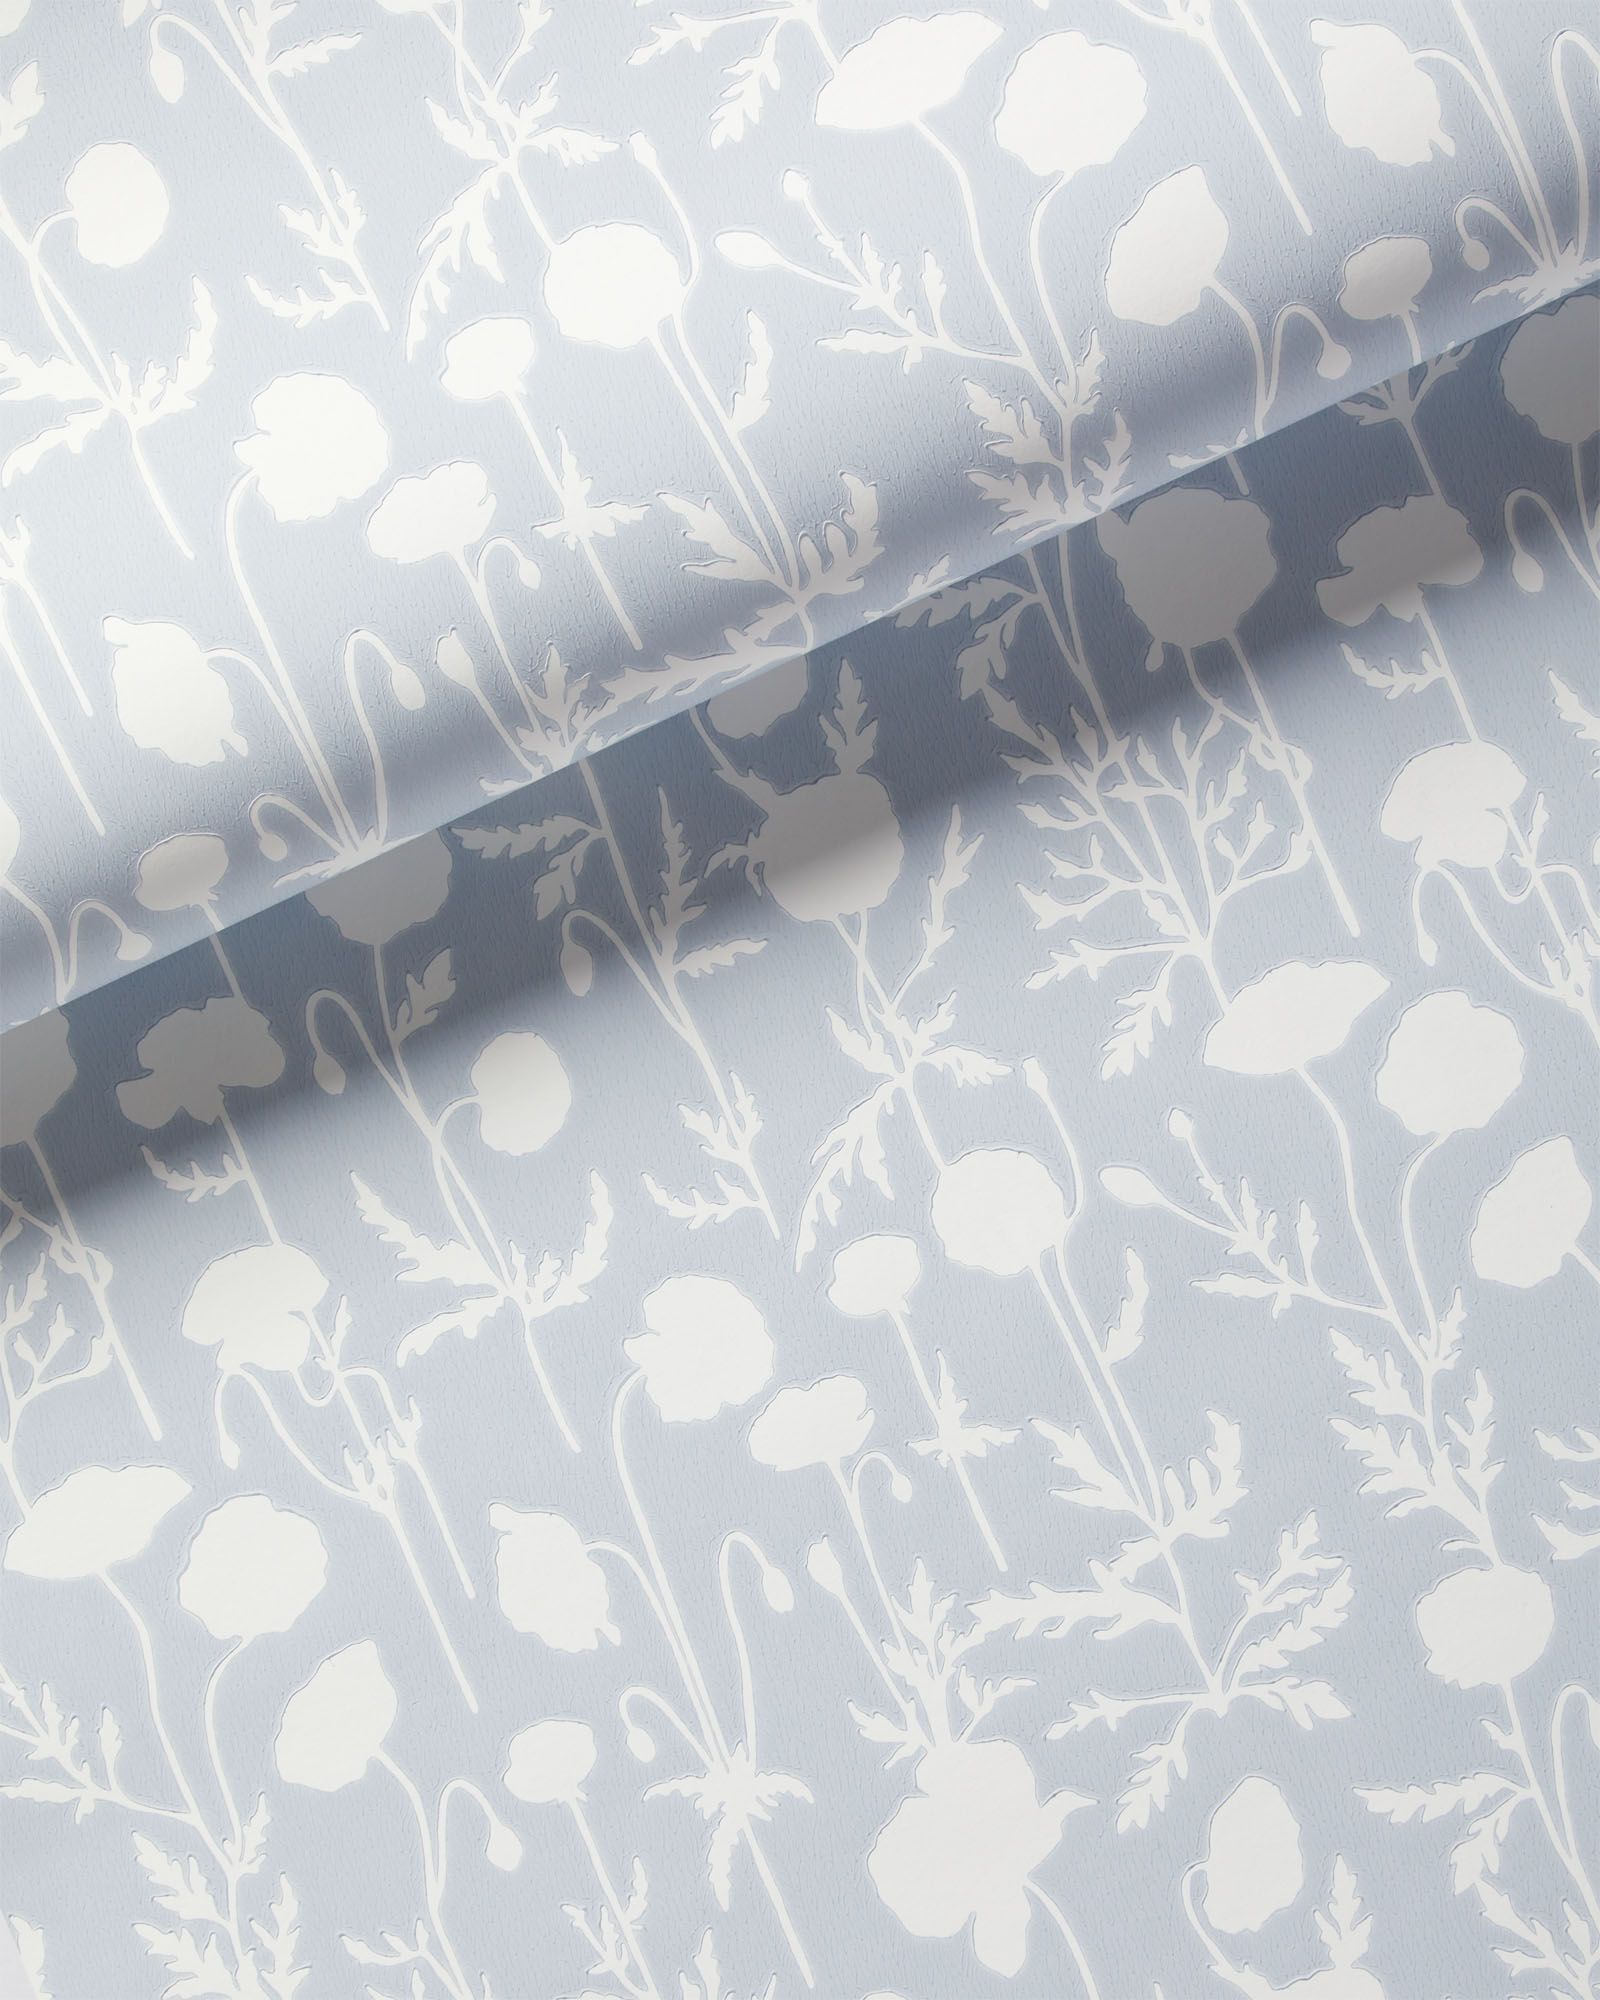 Bloomsbury Wallpaper Swatch | Serena and Lily